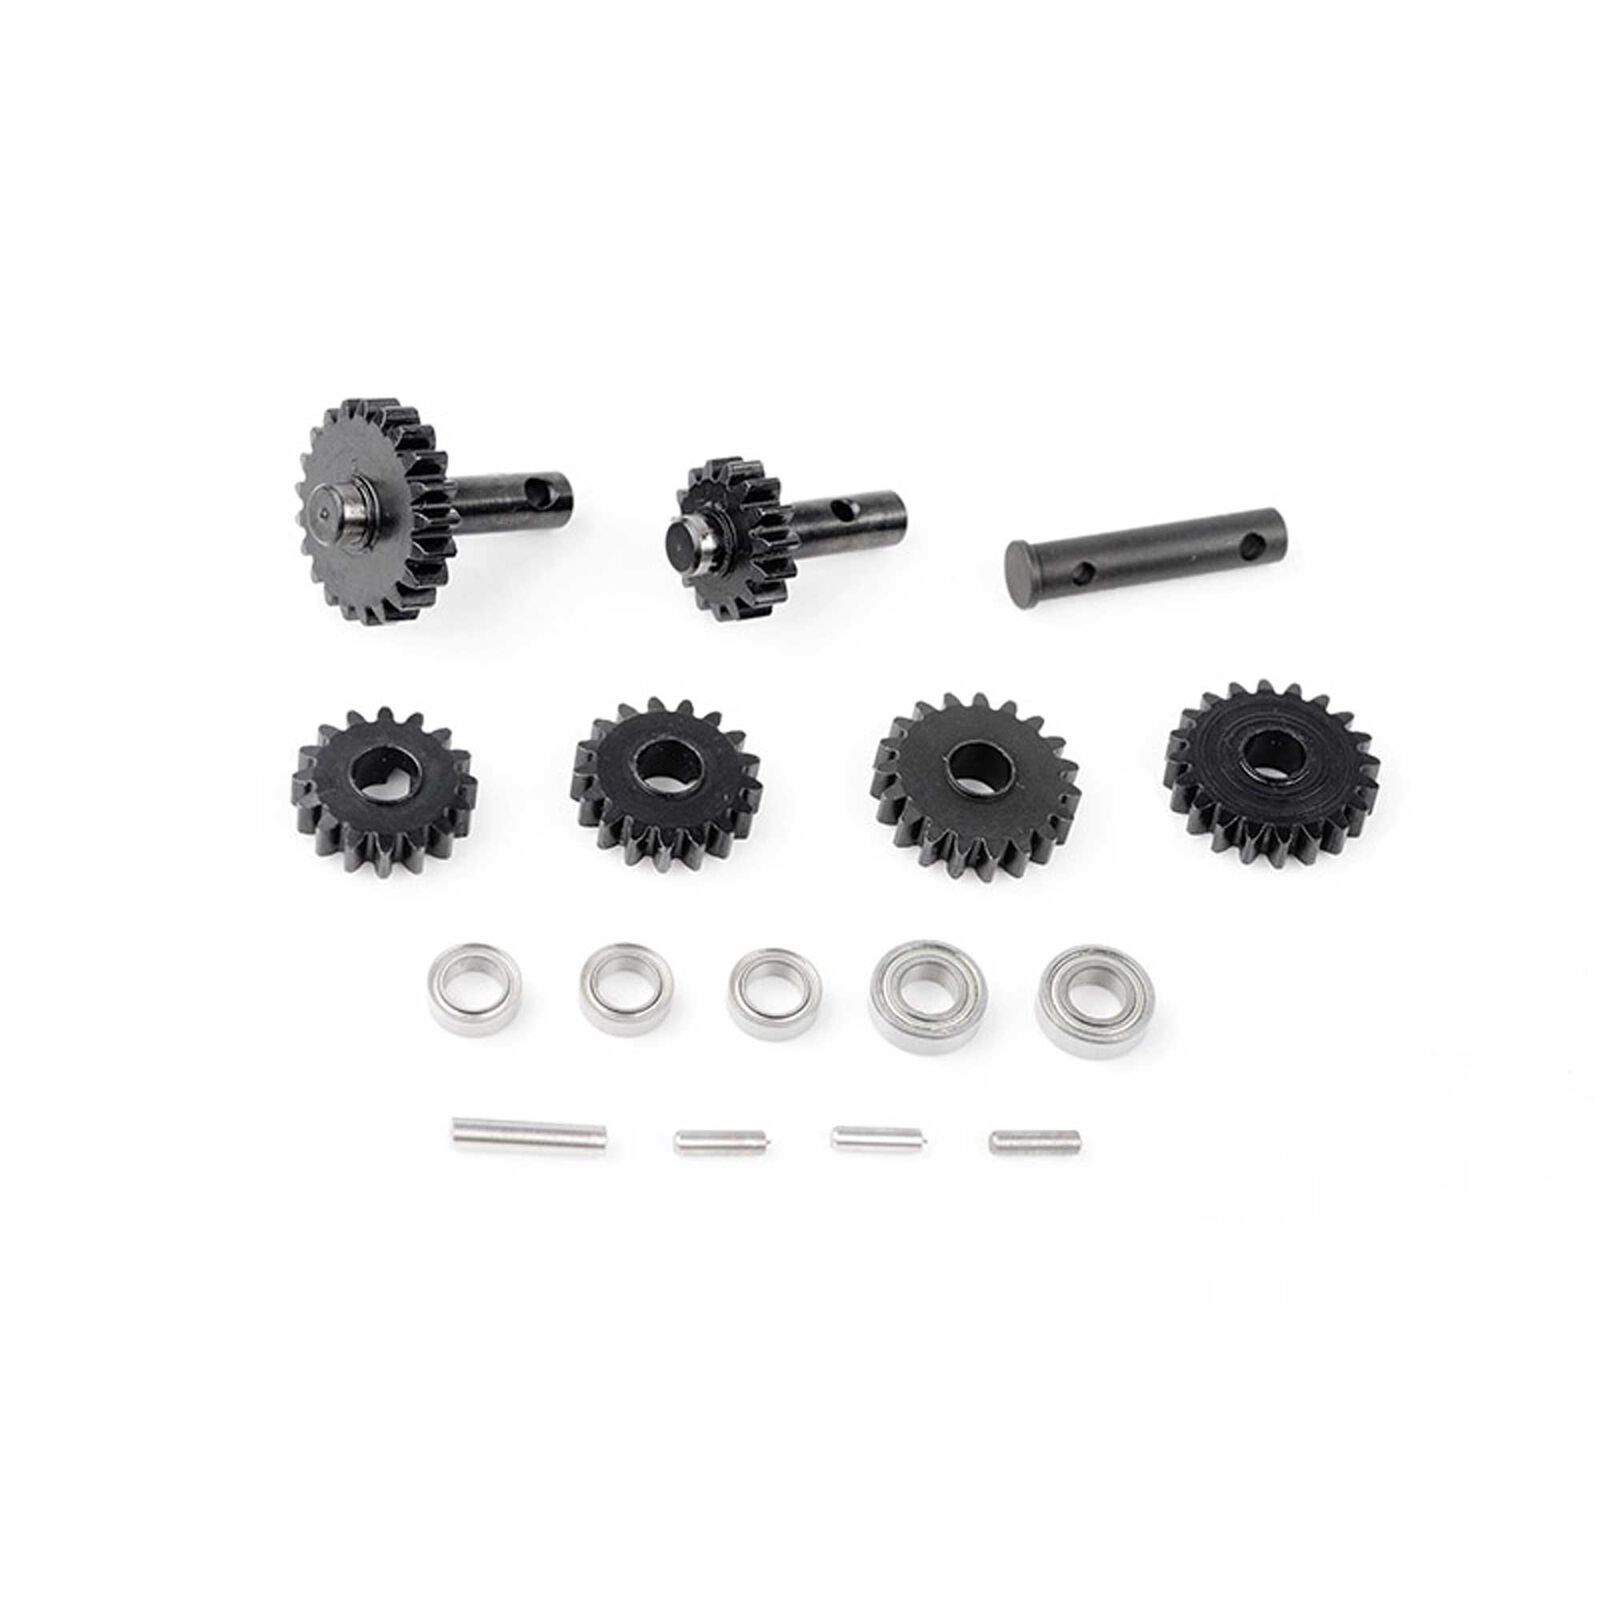 TF3 Transfer Case Replacement Gears